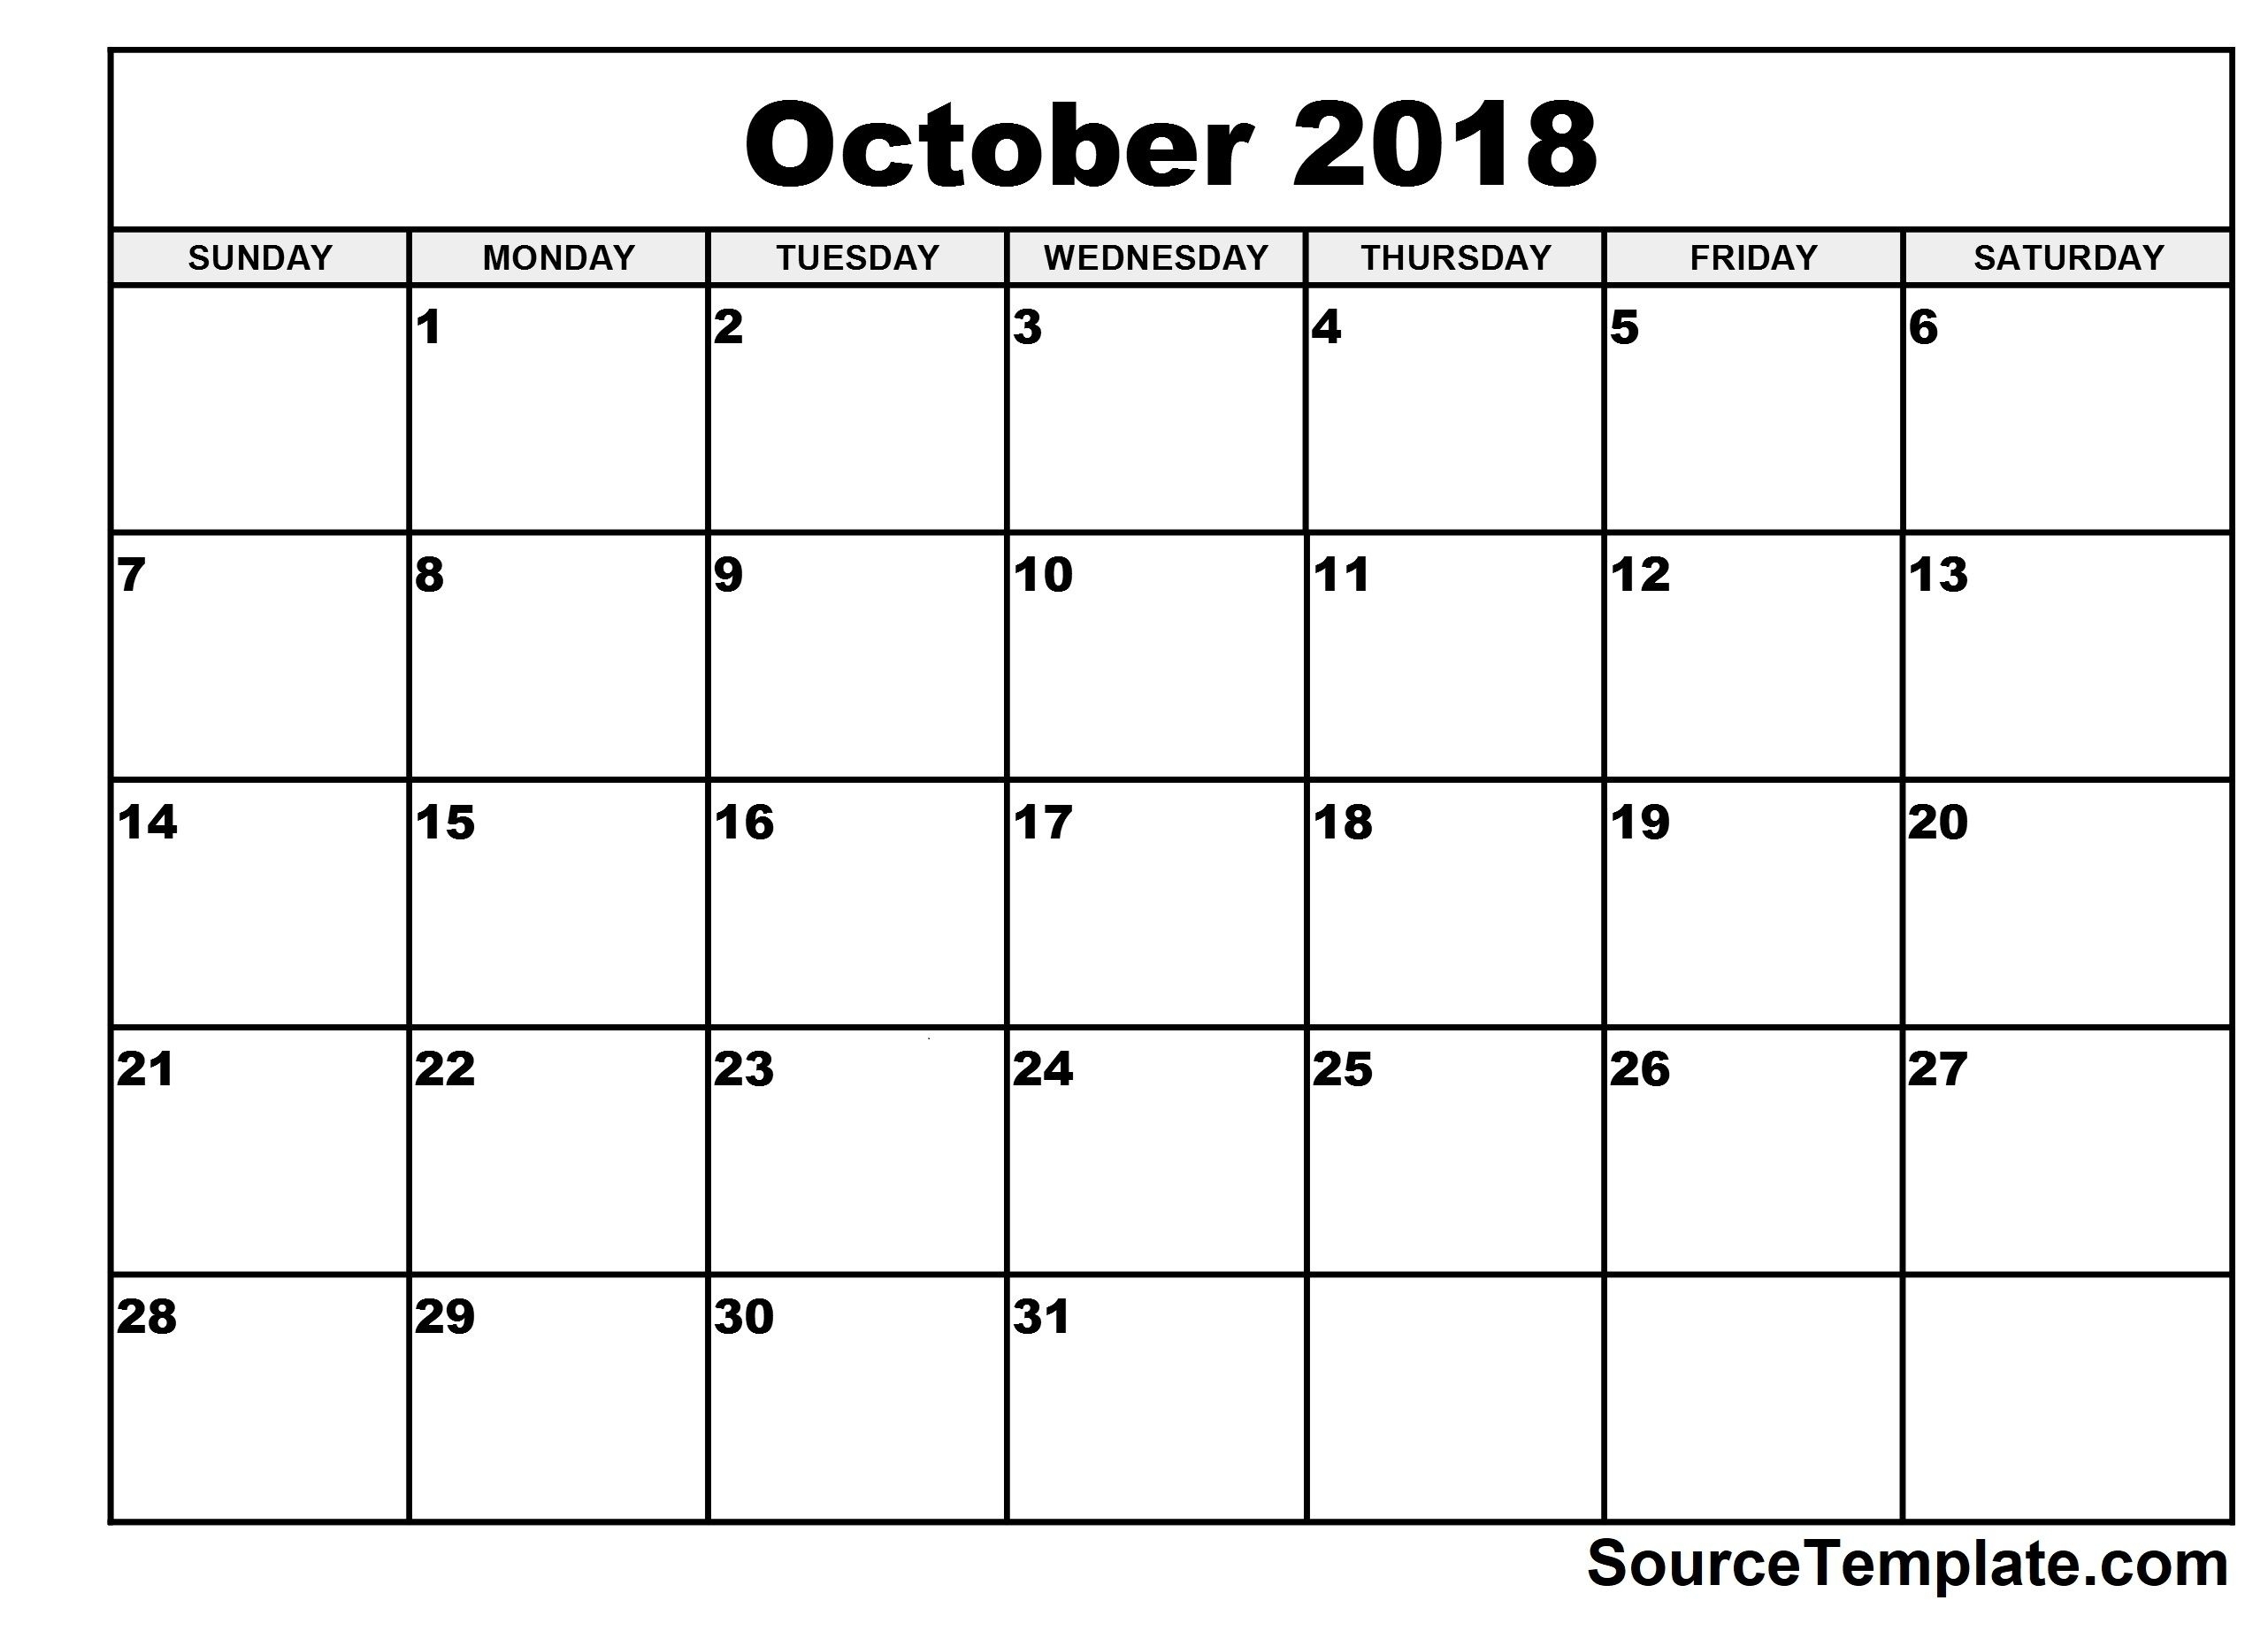 Blank Calendar Template Monday To Friday Only | Template Calendar for October Blank Calendar Monday To Friday Only